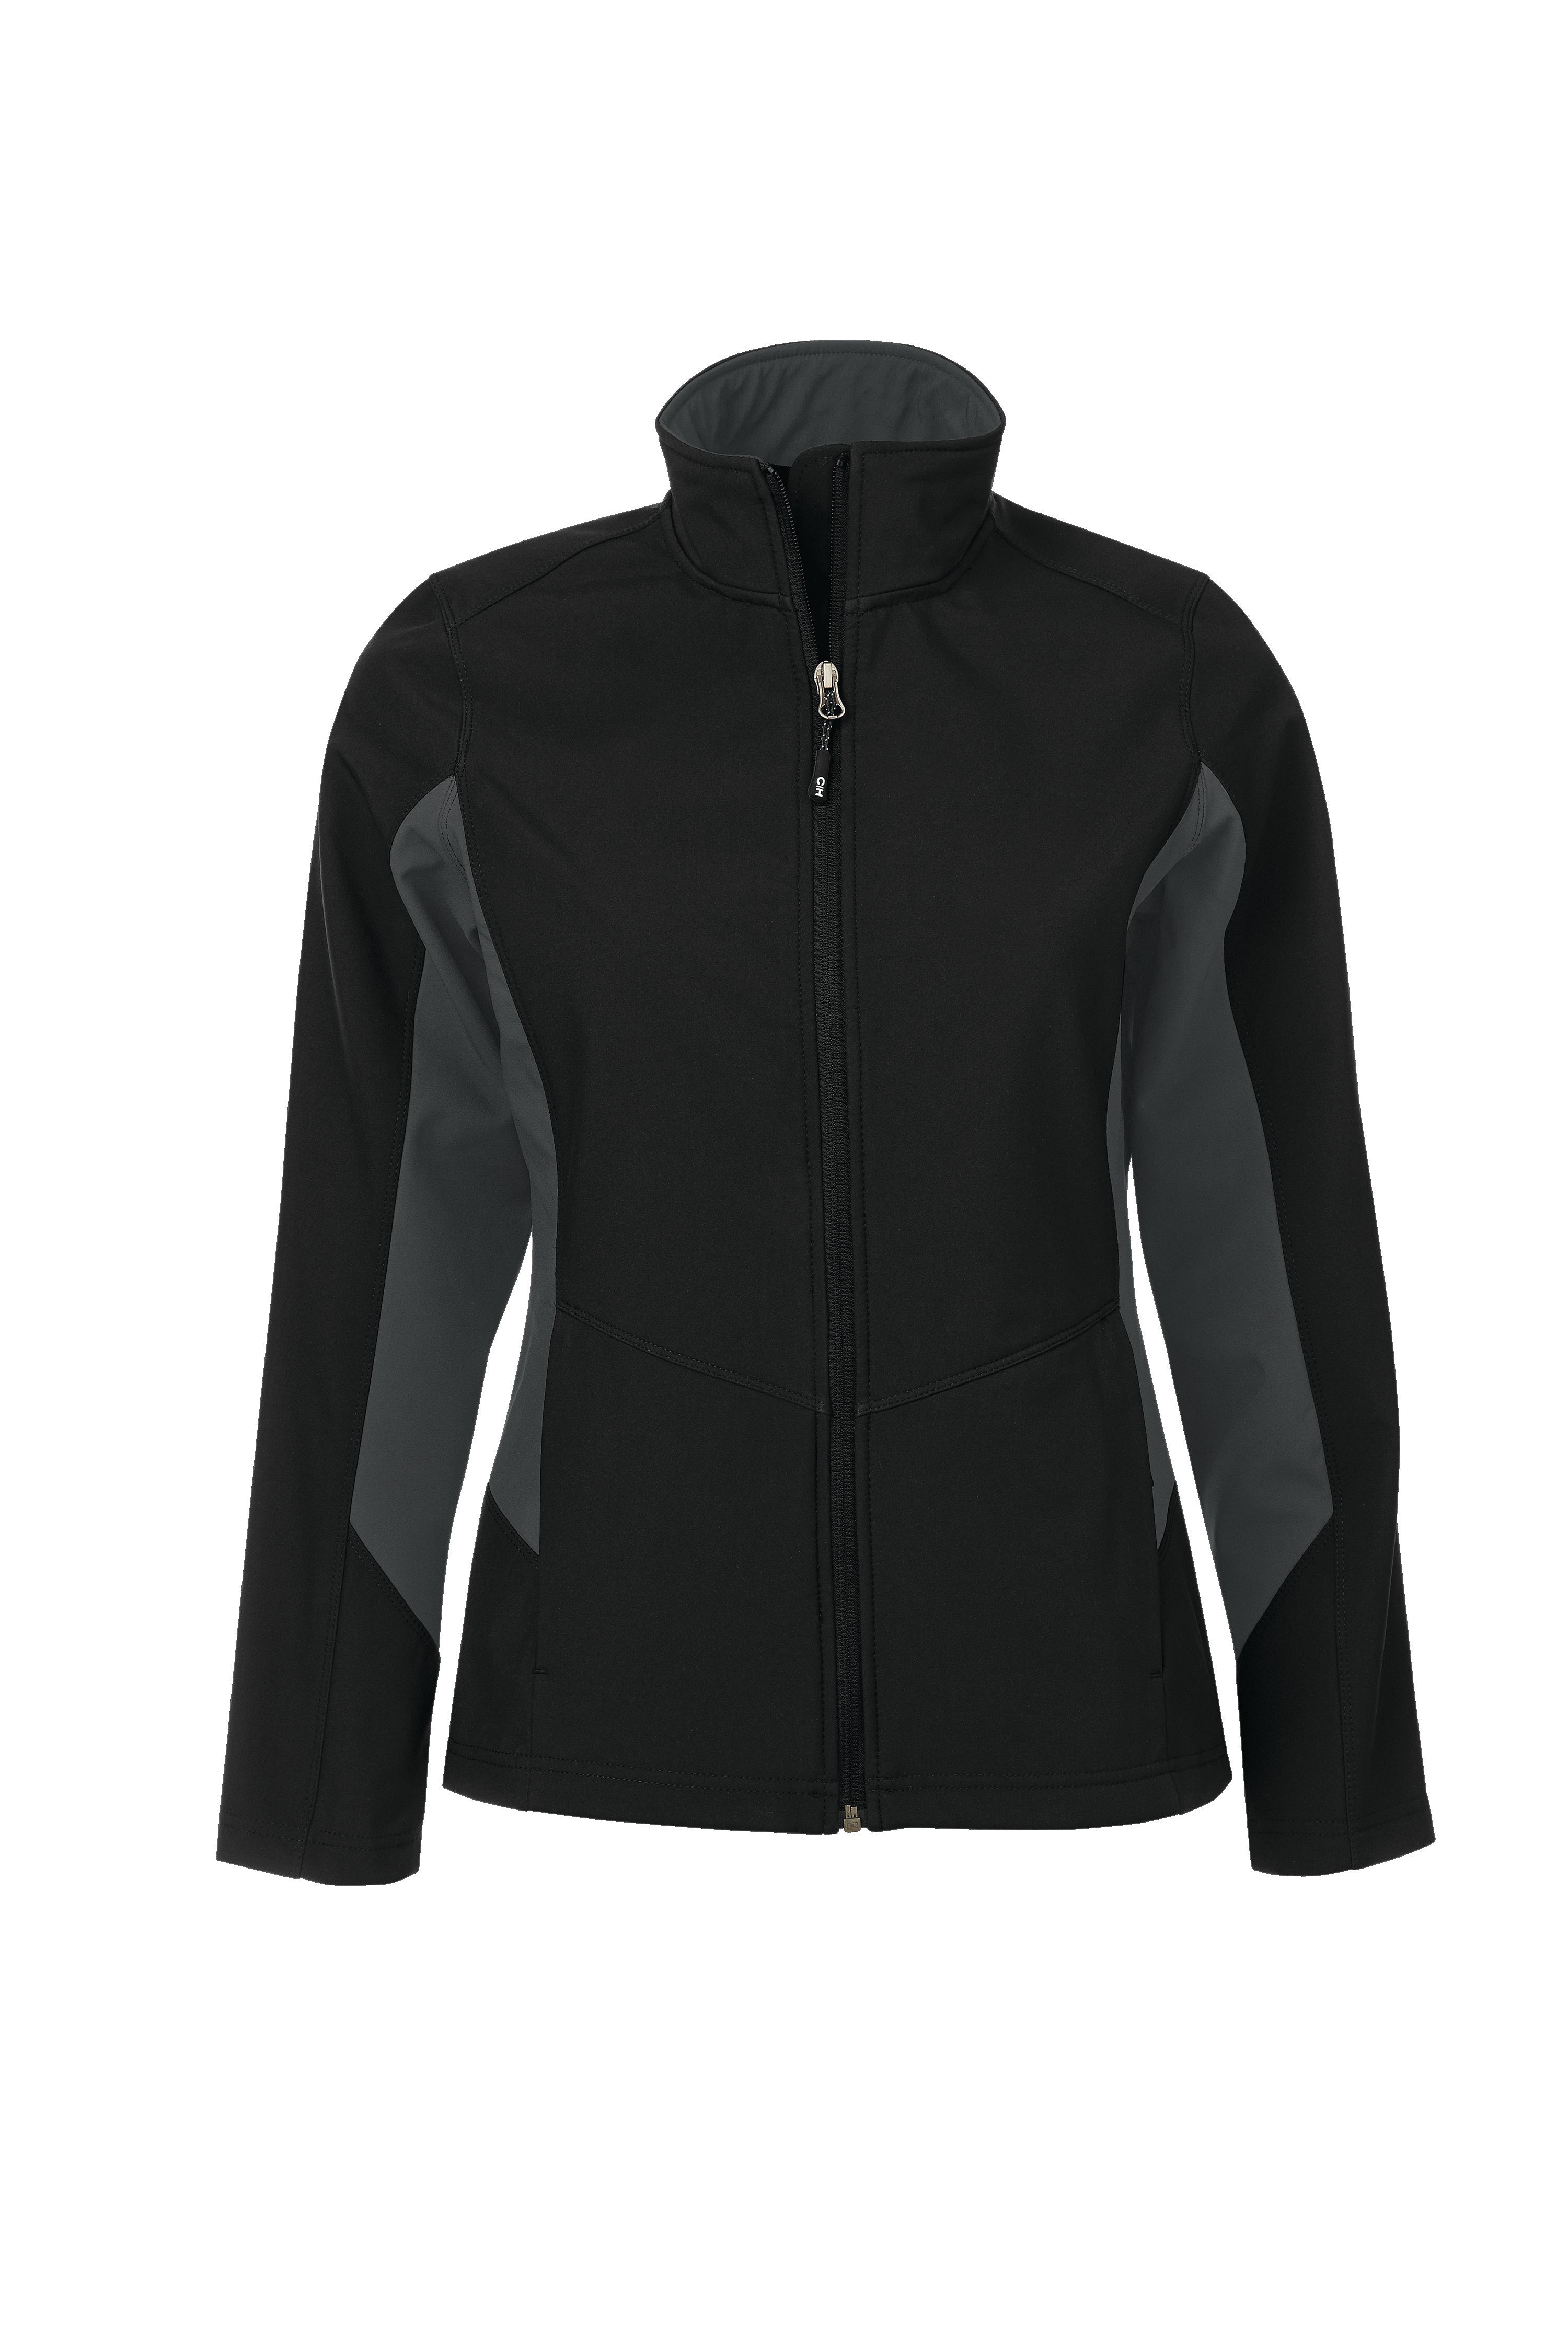 COAL HARBOUR® EVERYDAY COLOUR BLOCK WATER REPELLENT SOFT SHELL LADIES' JACKET. L7604